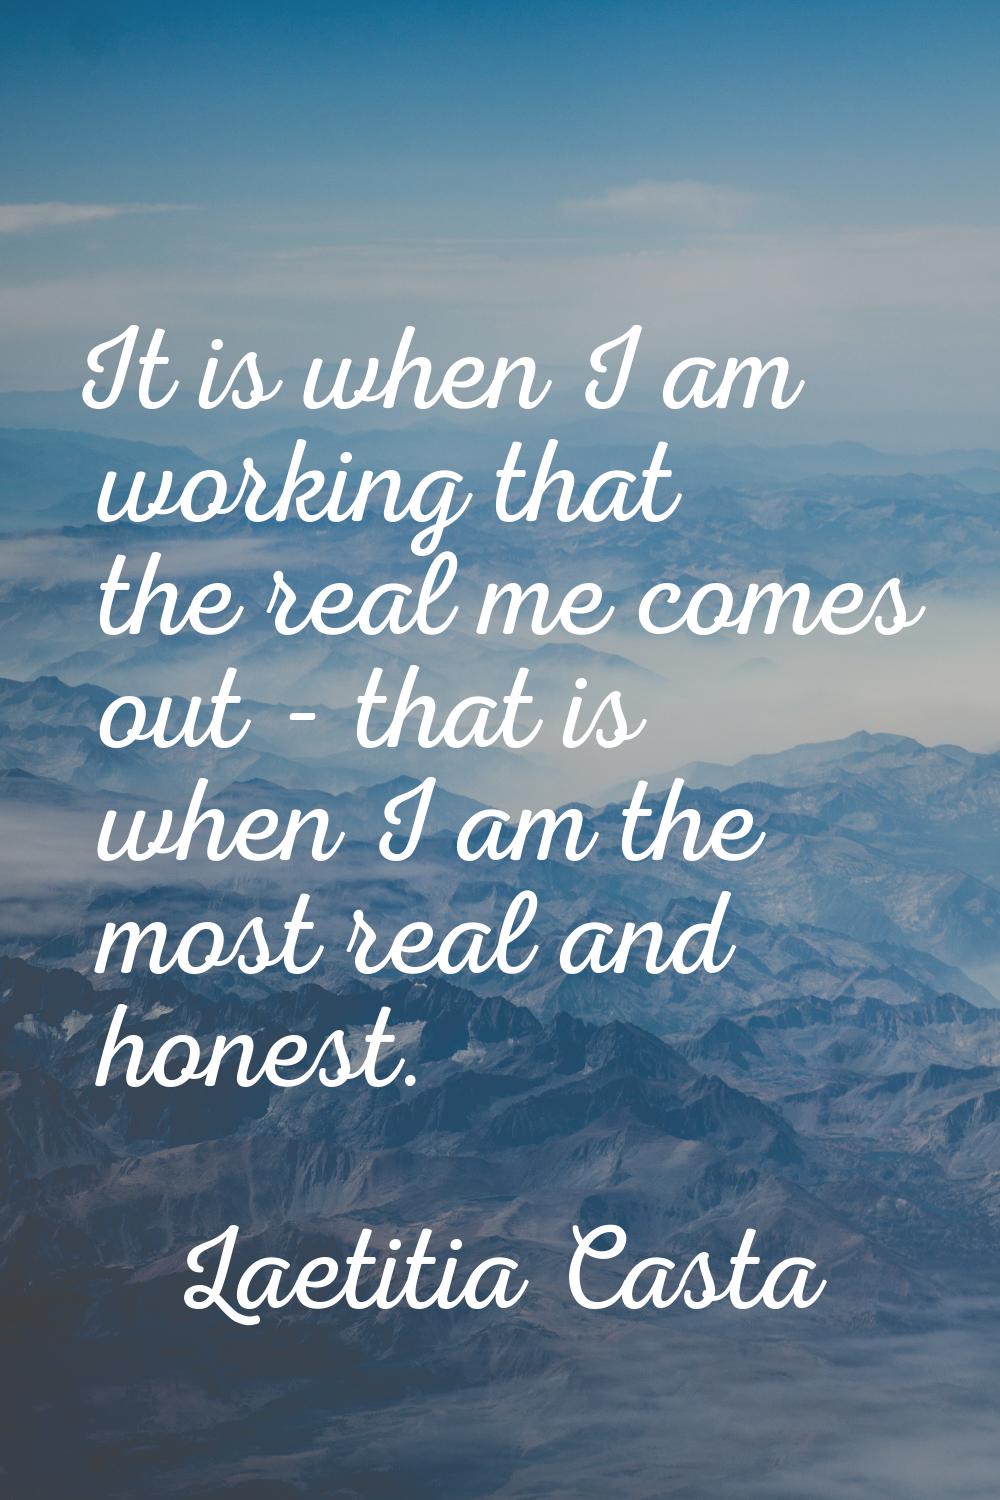 It is when I am working that the real me comes out - that is when I am the most real and honest.